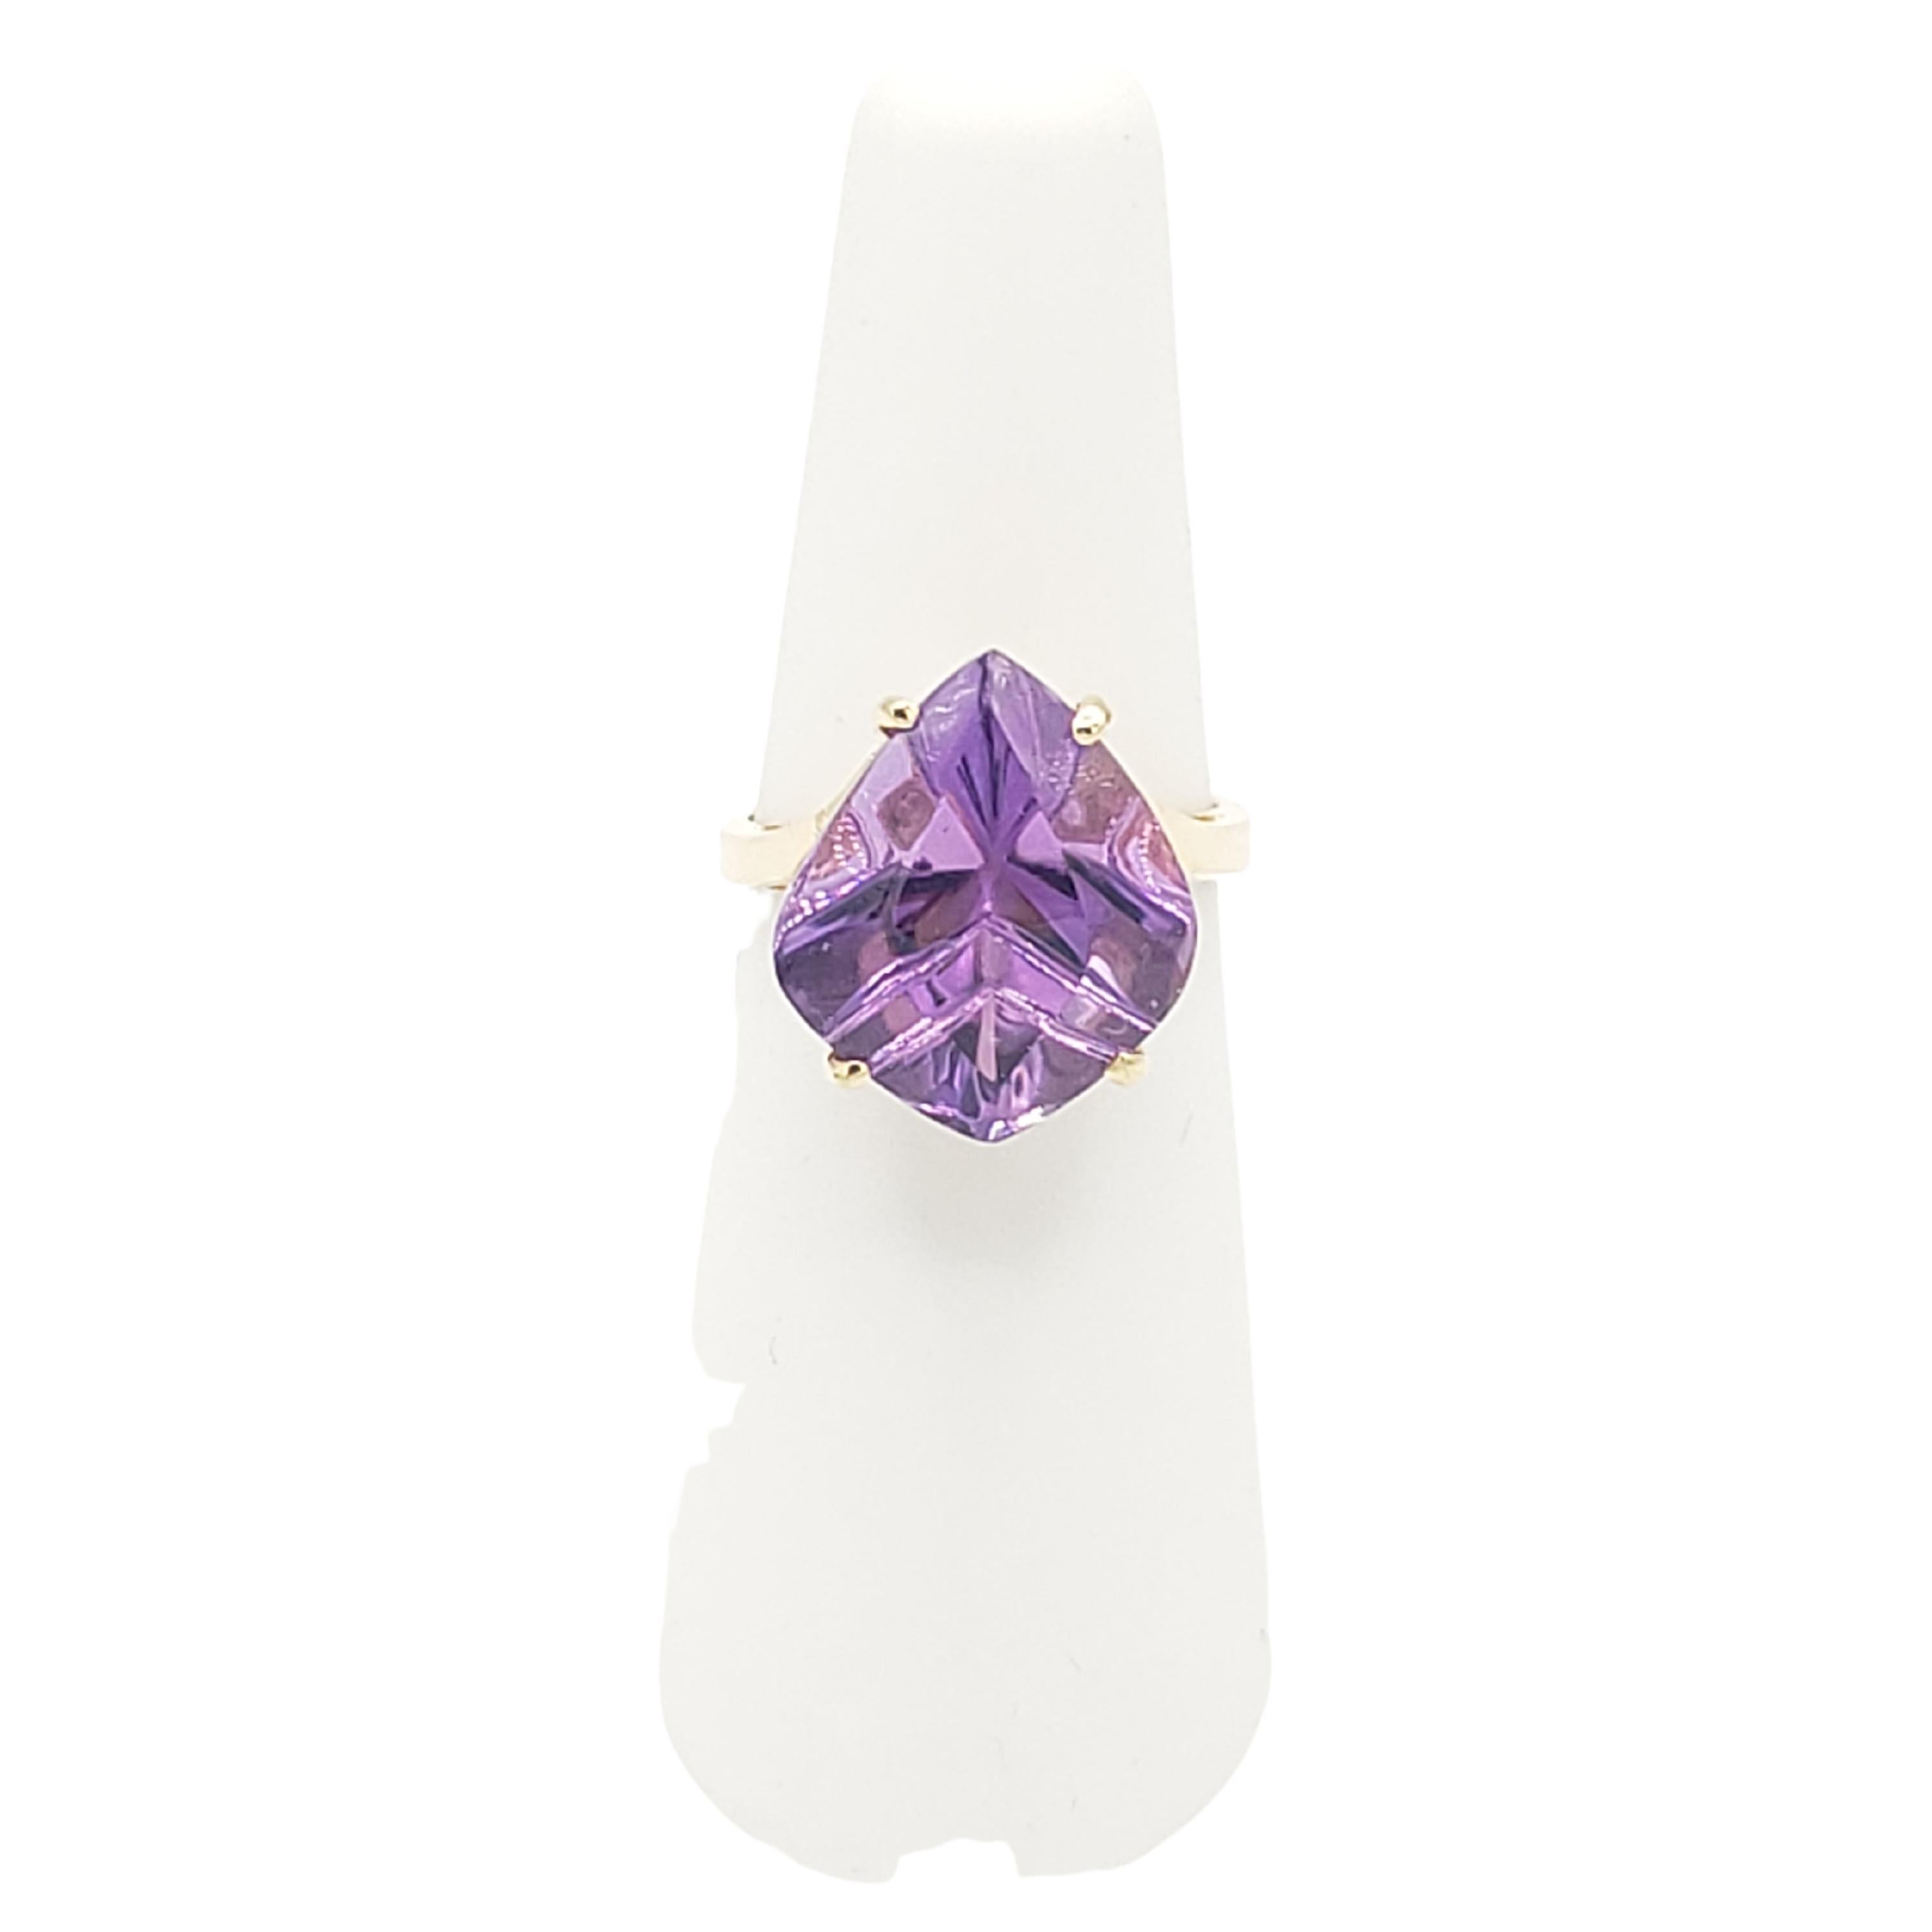 This stunning new ring features an 8 Ct. natural Brazilian AAAA QUALITY VVS amethyst fantasy cut stone set in 14k solid yellow gold. The gemstone's purple hue is beautifully complemented by the warm tone of the gold. Crafted by LaFrancee, this ring